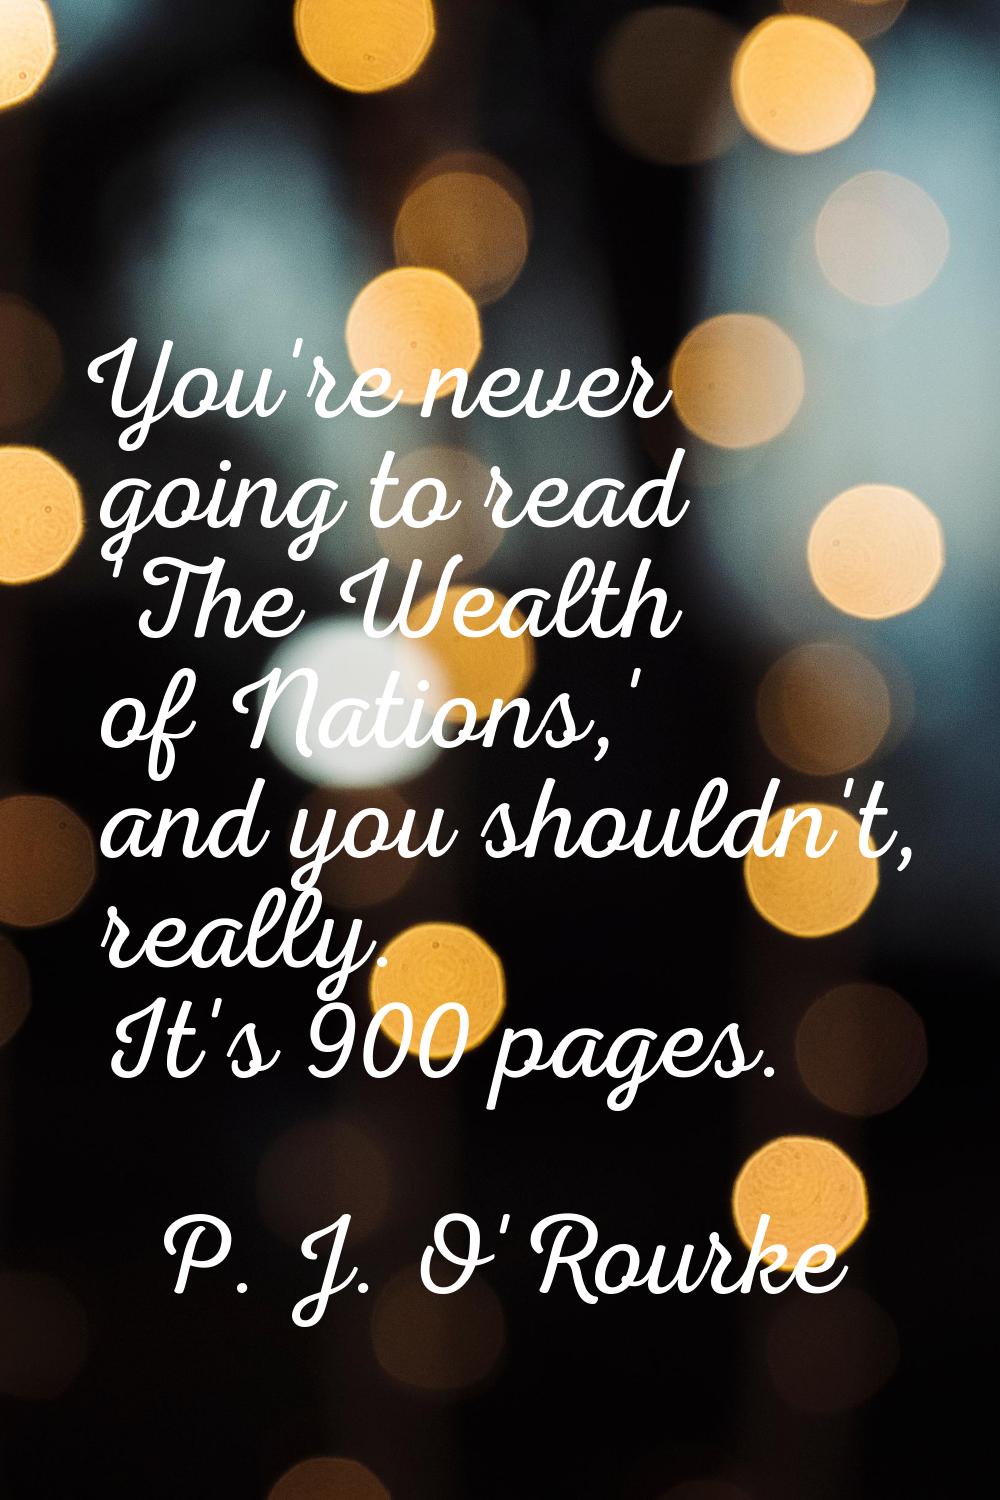 You're never going to read 'The Wealth of Nations,' and you shouldn't, really. It's 900 pages.